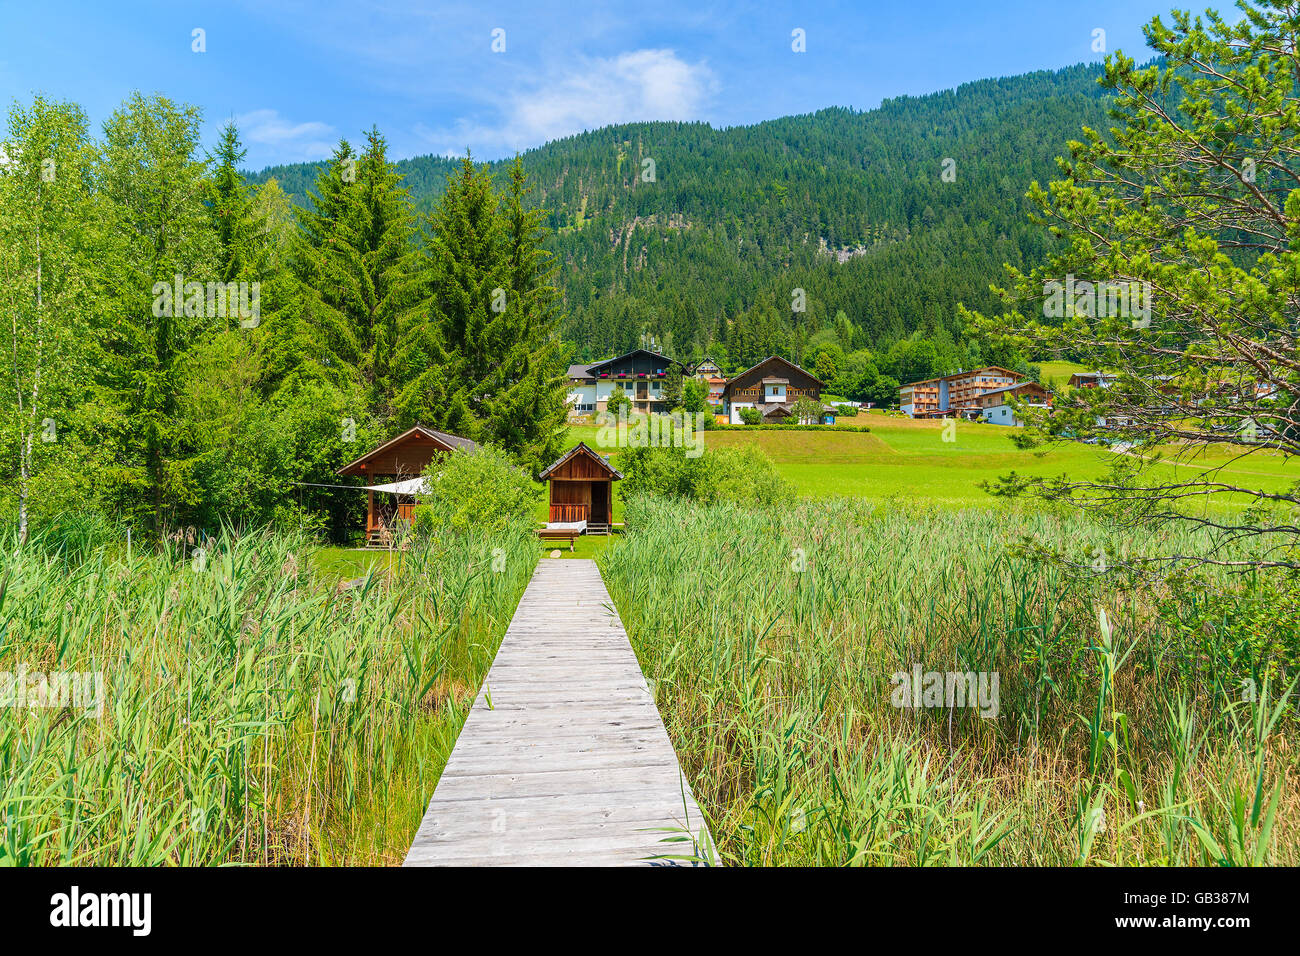 Wooden jetty in grass in alpine village on shore of Weissensee lake in summer landscape of Alps Mountains, Austria Stock Photo